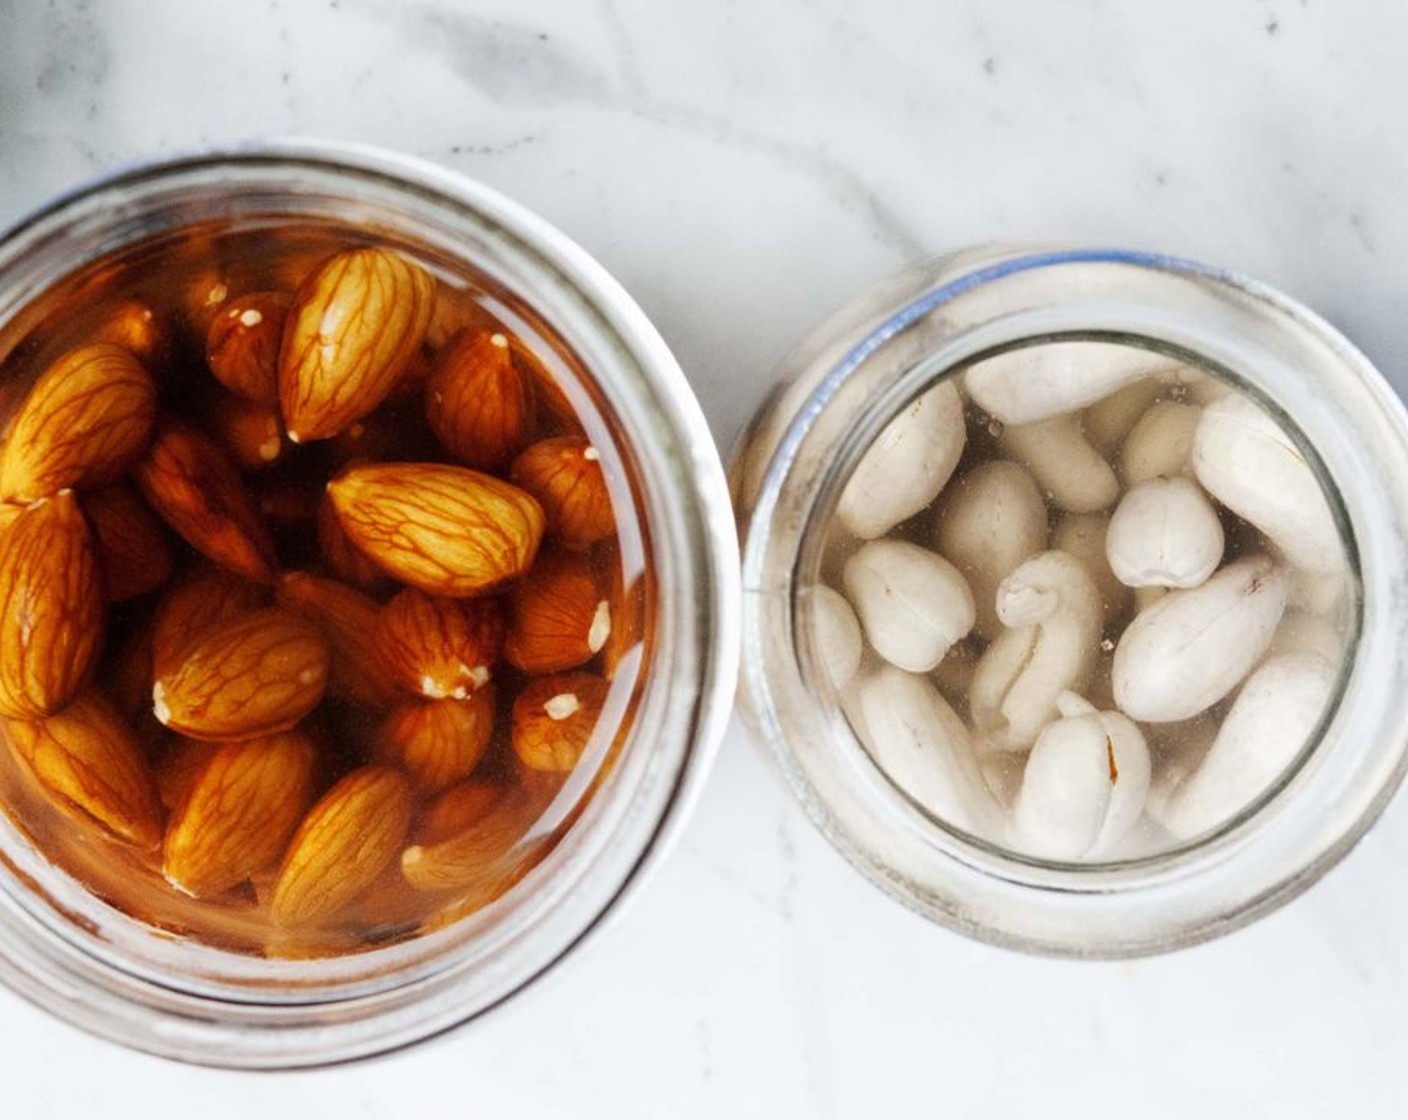 step 1 Soak the Almonds (1/2 cup) overnight and the Cashew Nuts (1/2 cup) for at least 4 hours.